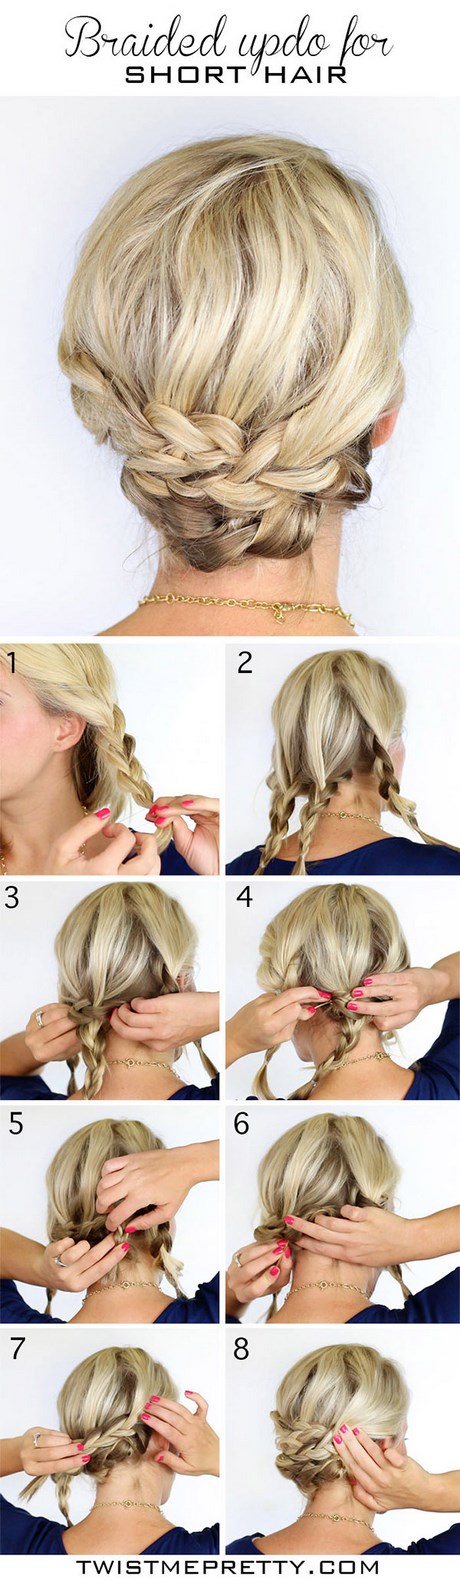 Easy styles for short hair at home easy-styles-for-short-hair-at-home-65_12